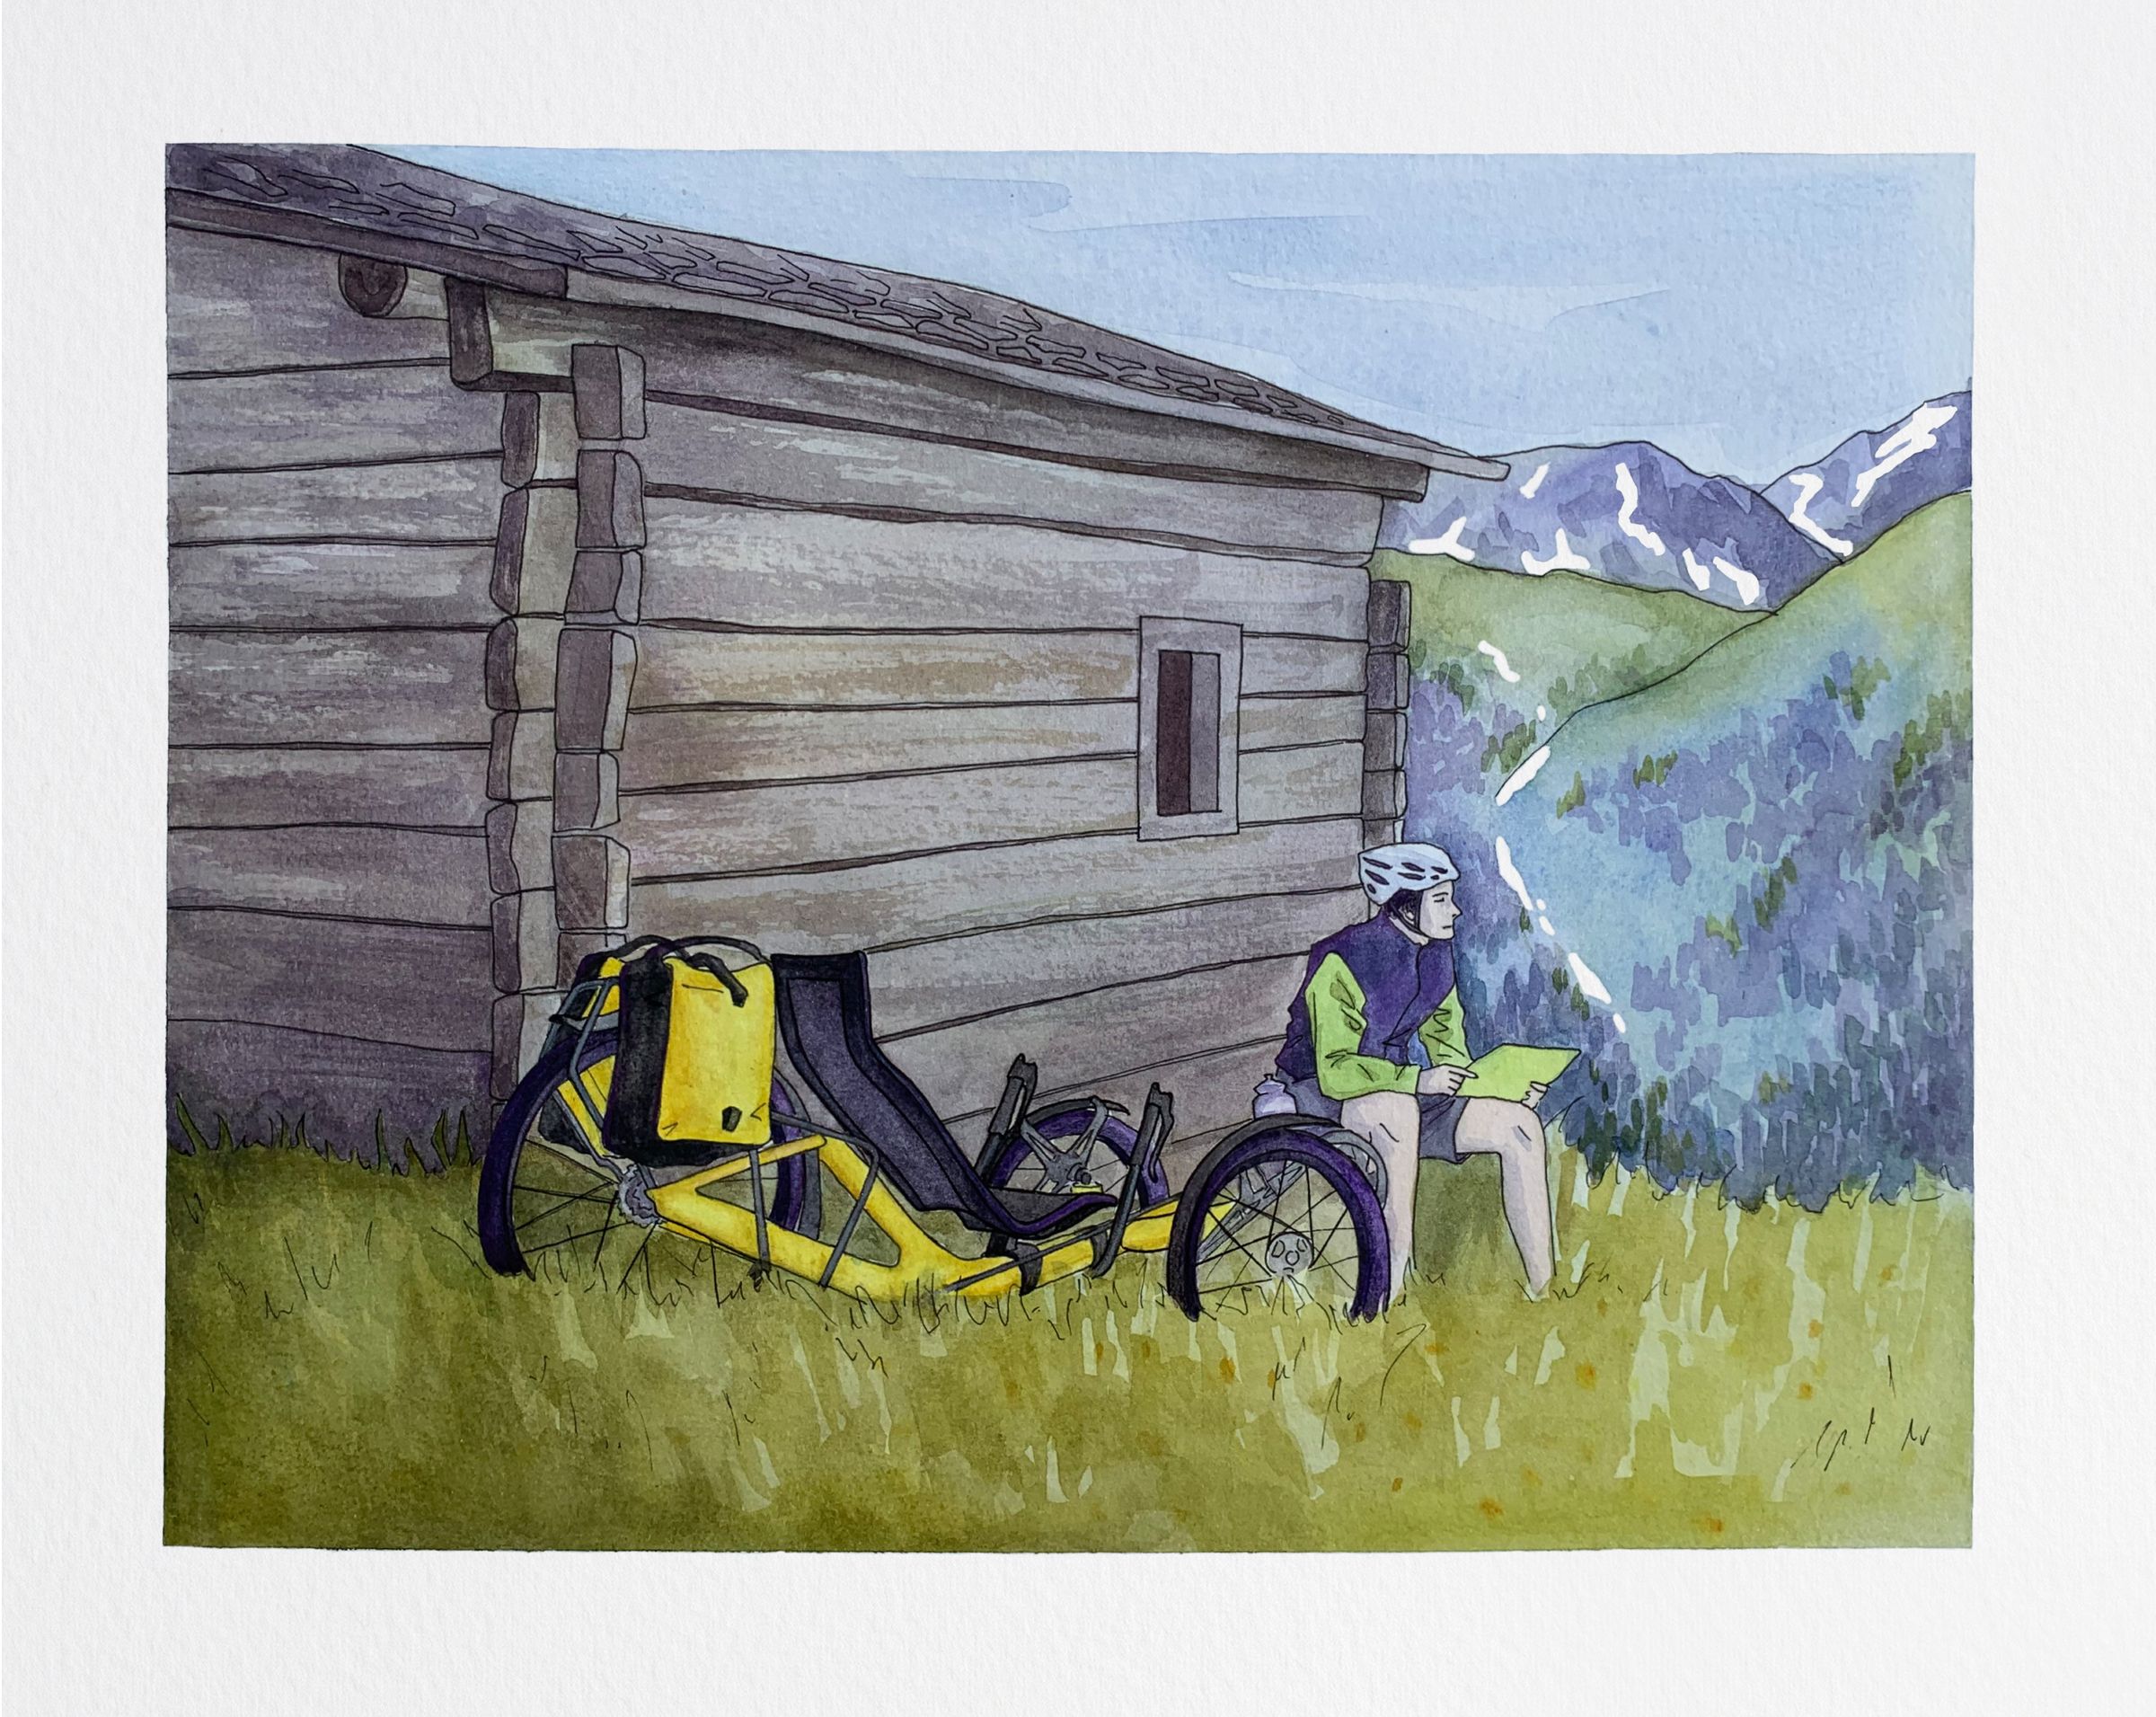 Painting of a recumbent trike in the Alps